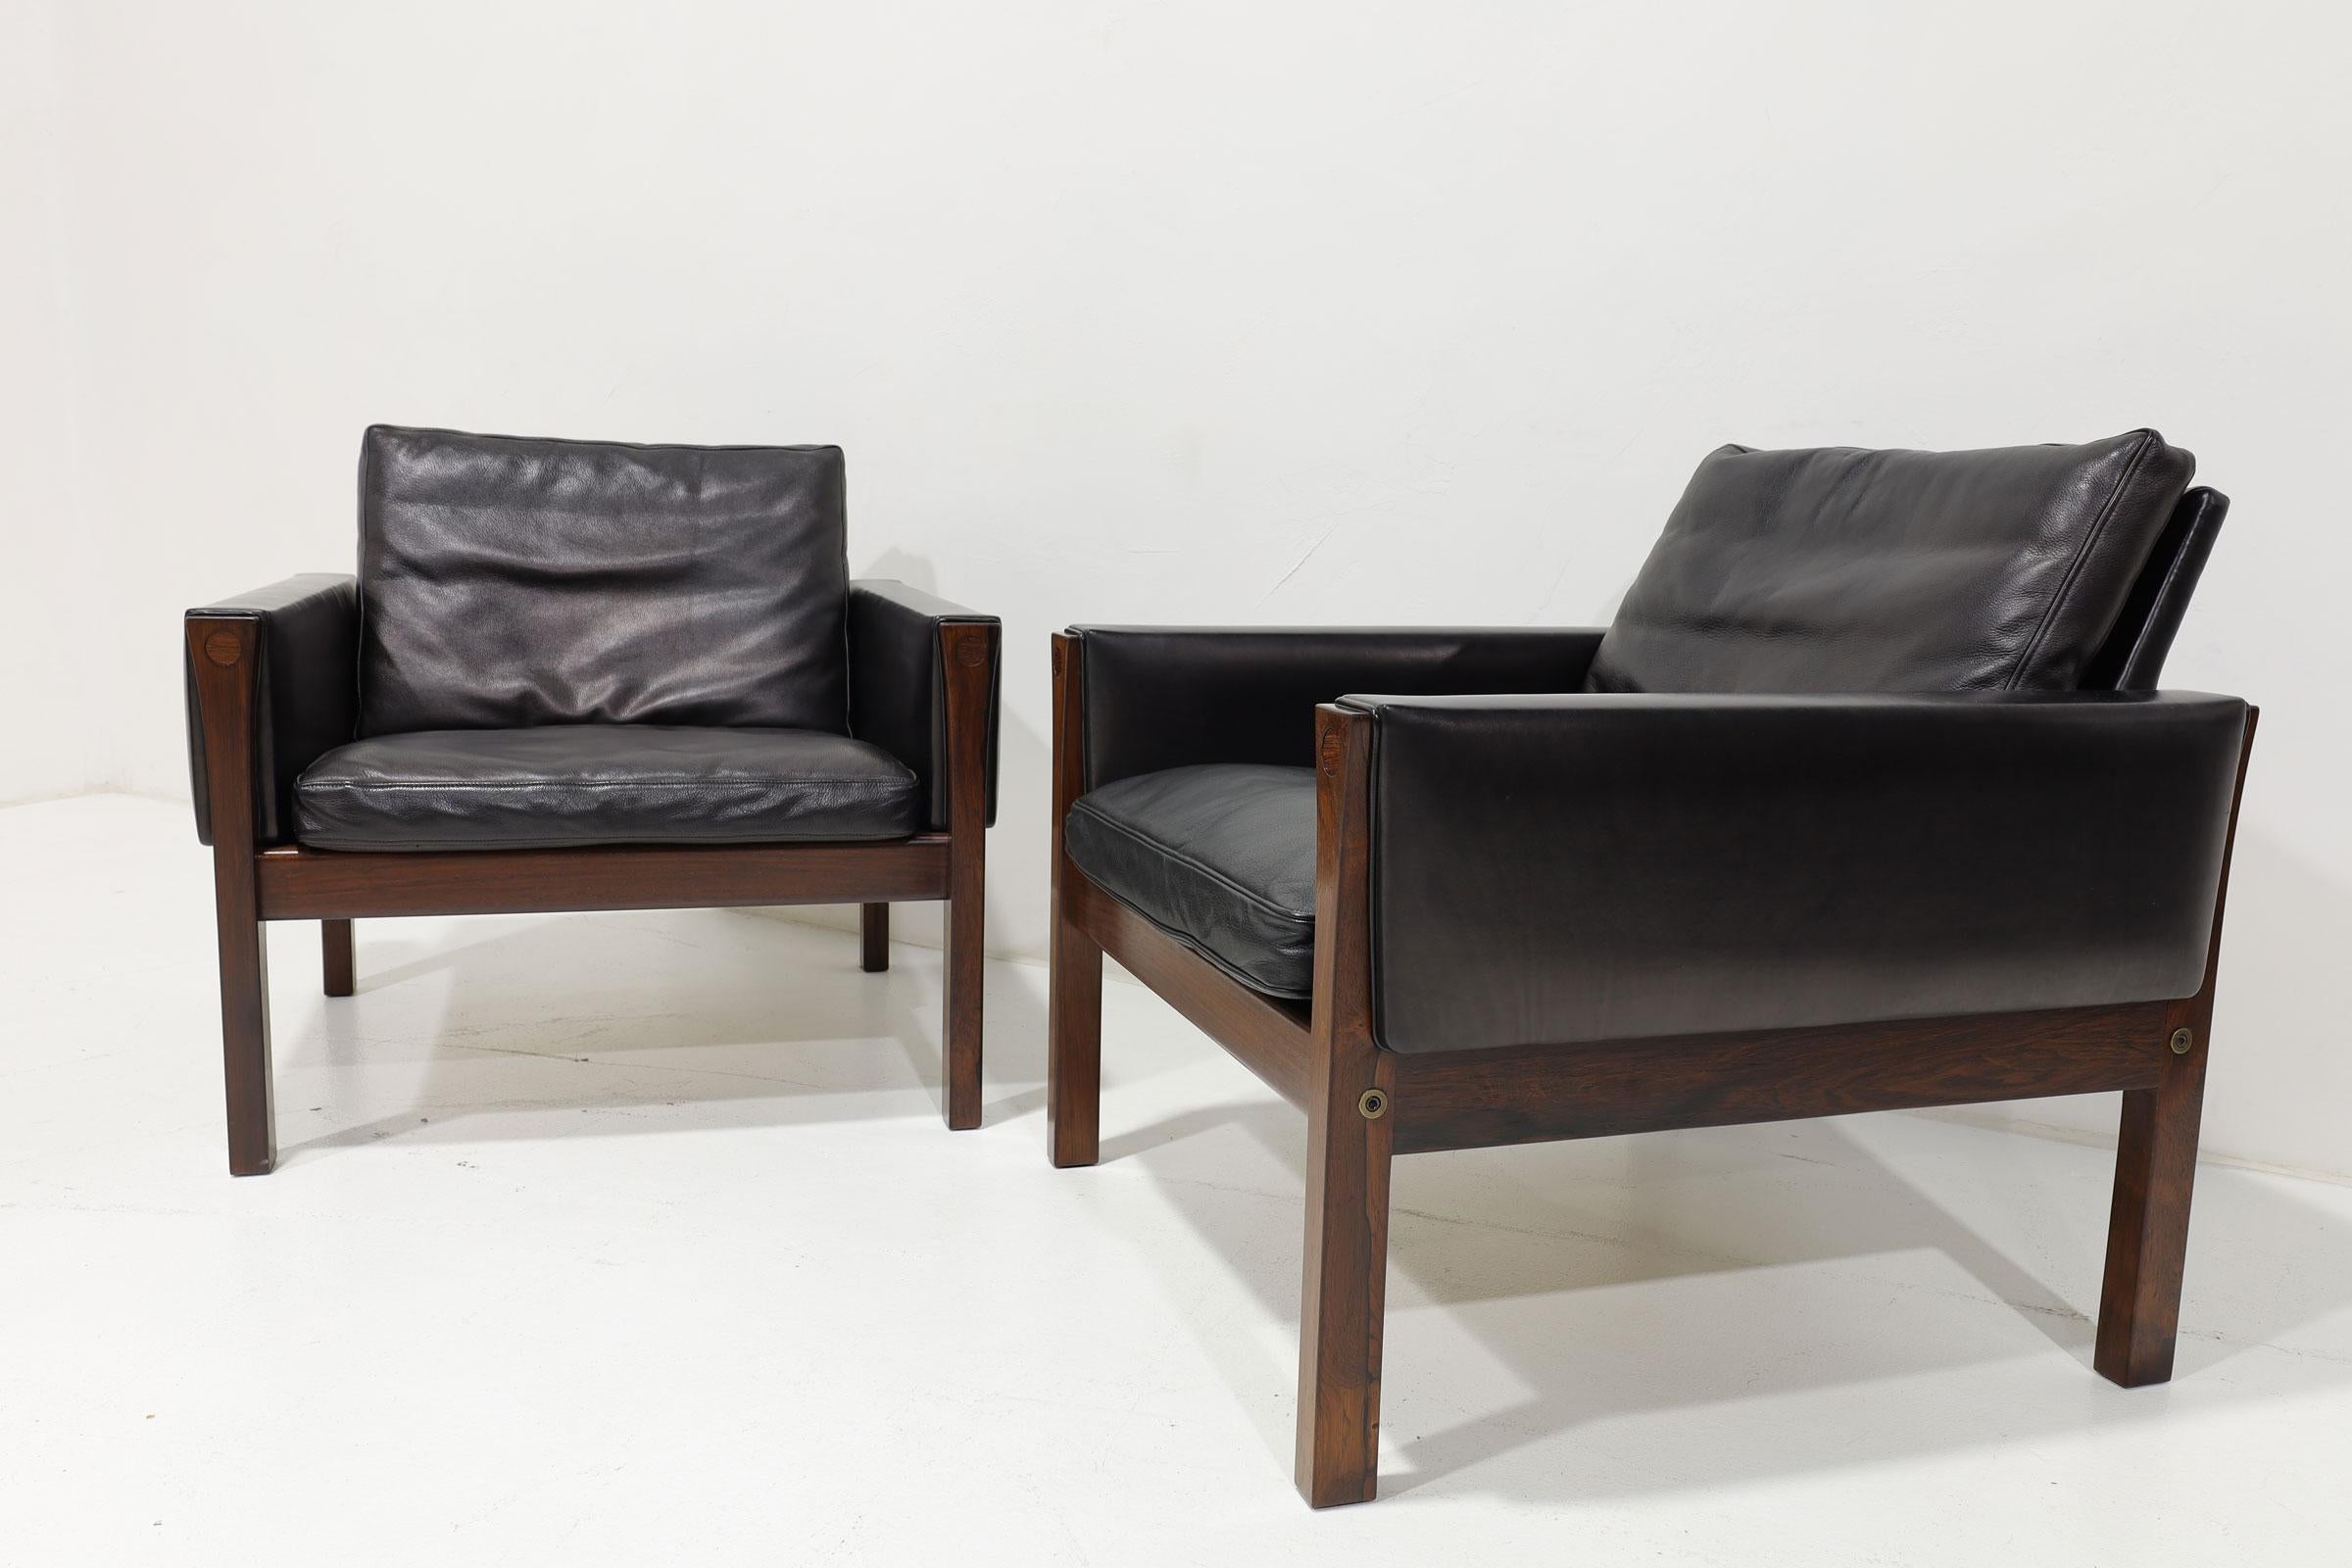 Danish Hans Wegner Model AP 62 Lounge Chairs in Rosewood and Black Leather